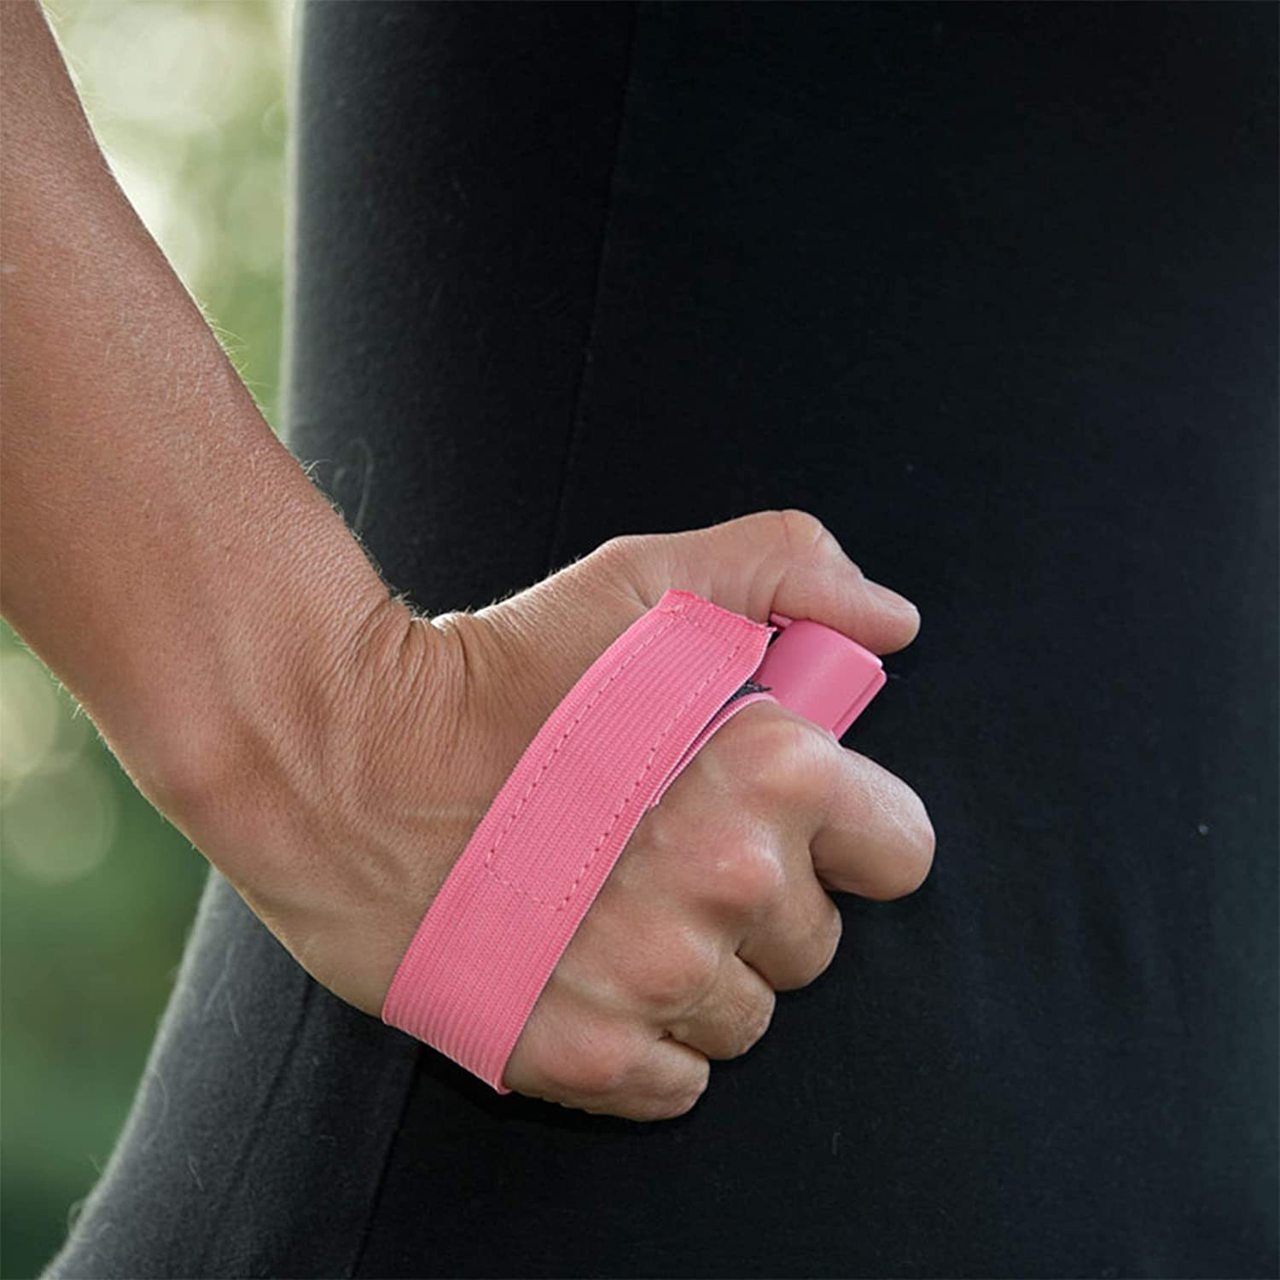 self defense products